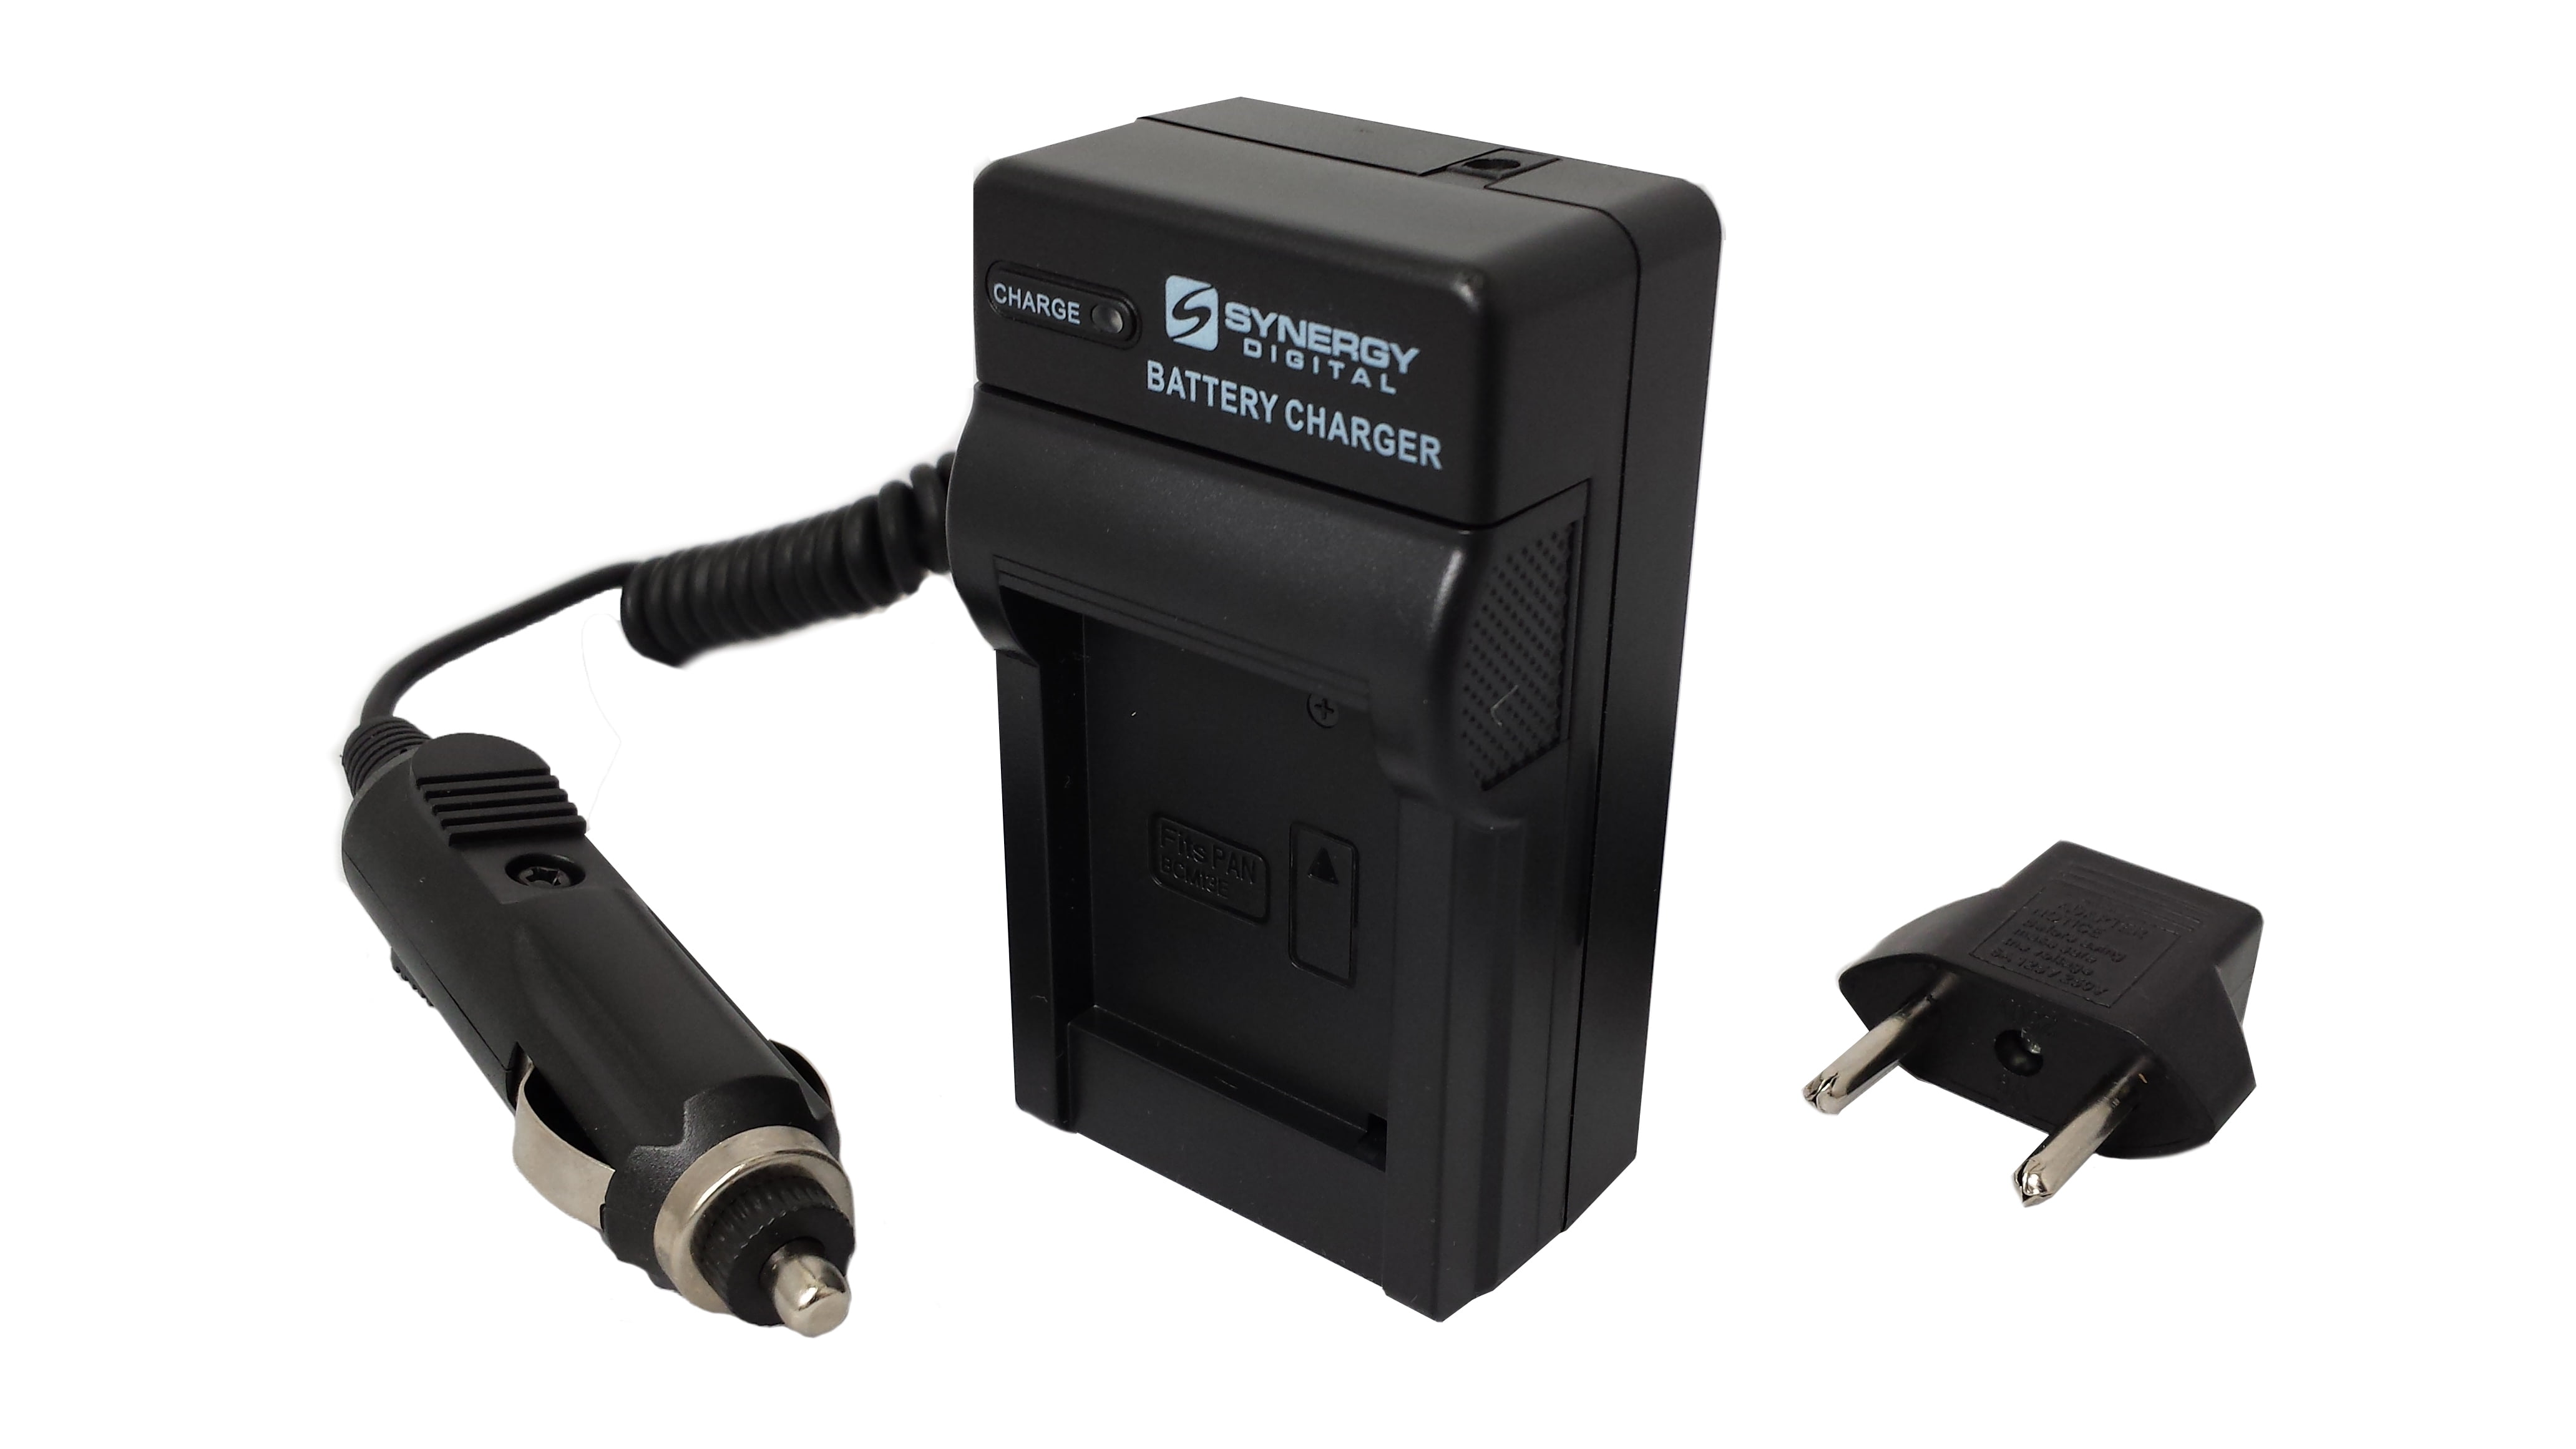 rots Overeenkomend Toneelschrijver Synergy Digital Camera Battery Charger, Works with Olympus D40 Digital  Camera, 110/220V, Compatible with Sony BCTRX Charger For Sony NP-BK1 battery  - Walmart.com